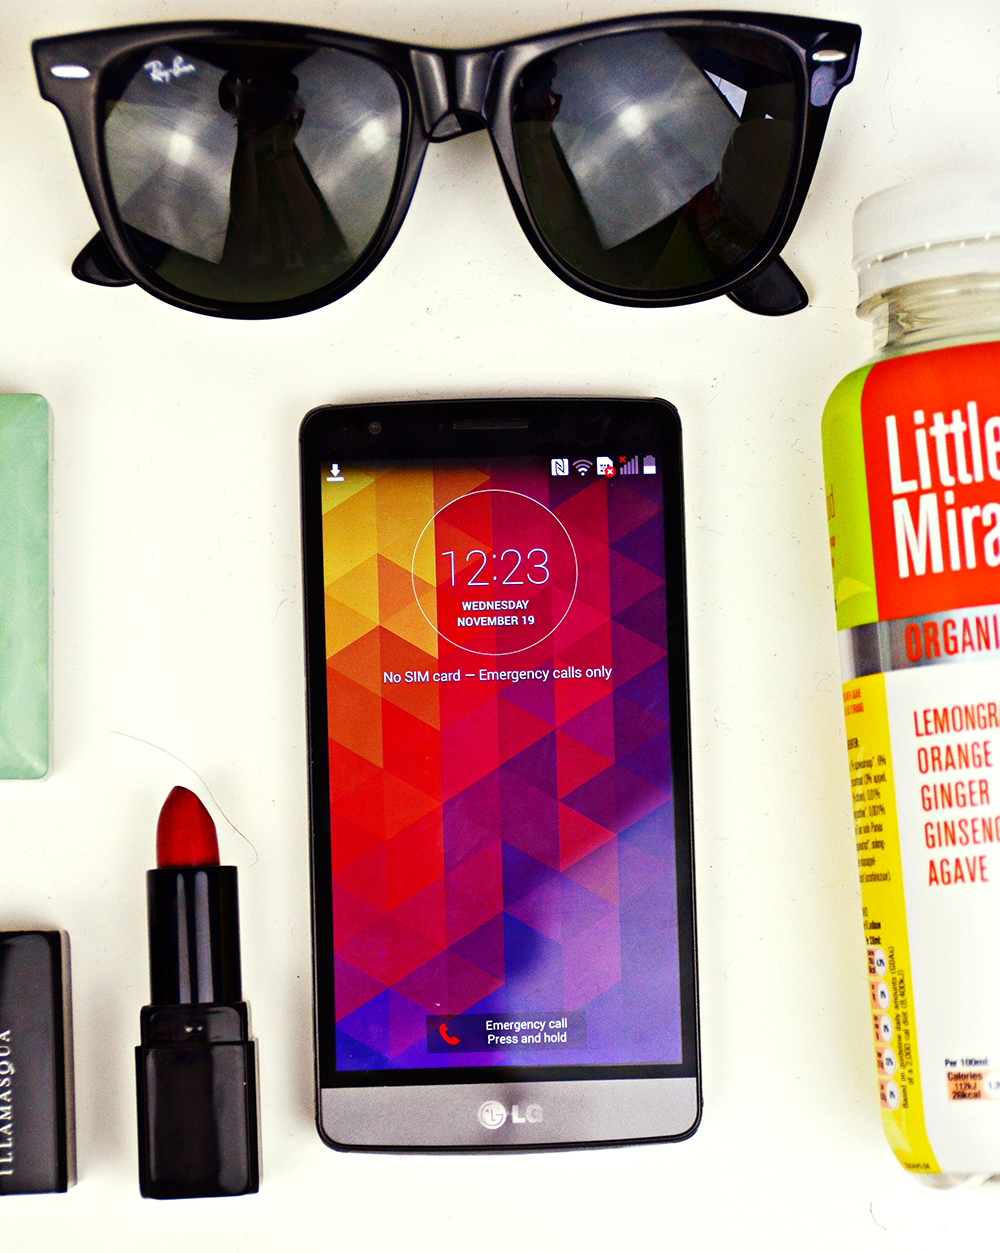 LG G3S Giveaway// UK Fashion & Lifestyle Blogger Stephi LaReine, status anxiety, ray bans, daniel wellington, ray bans, nica, little miracles, essie, lg, competition